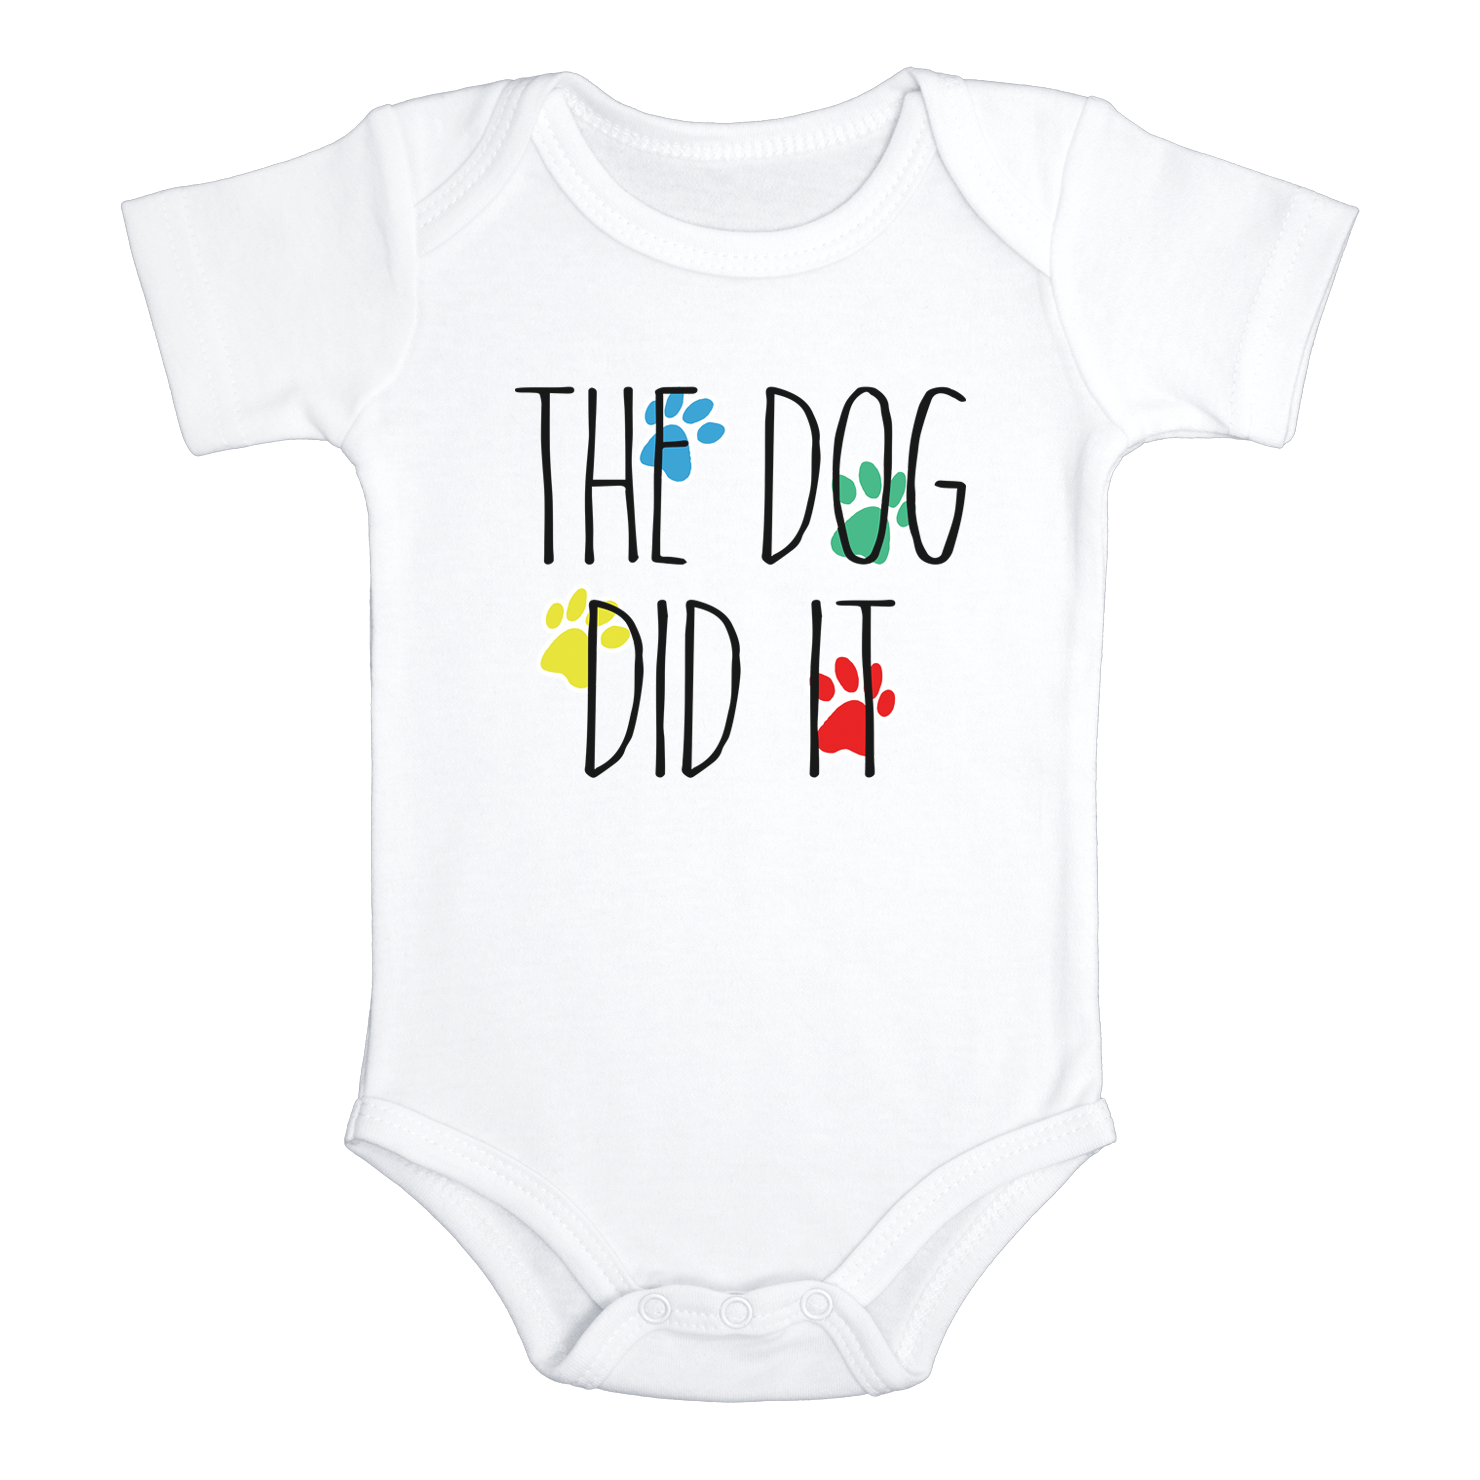 THE DOG DID IT Funny baby puppy onesies bodysuit (white: short or long sleeve) - HappyAddition